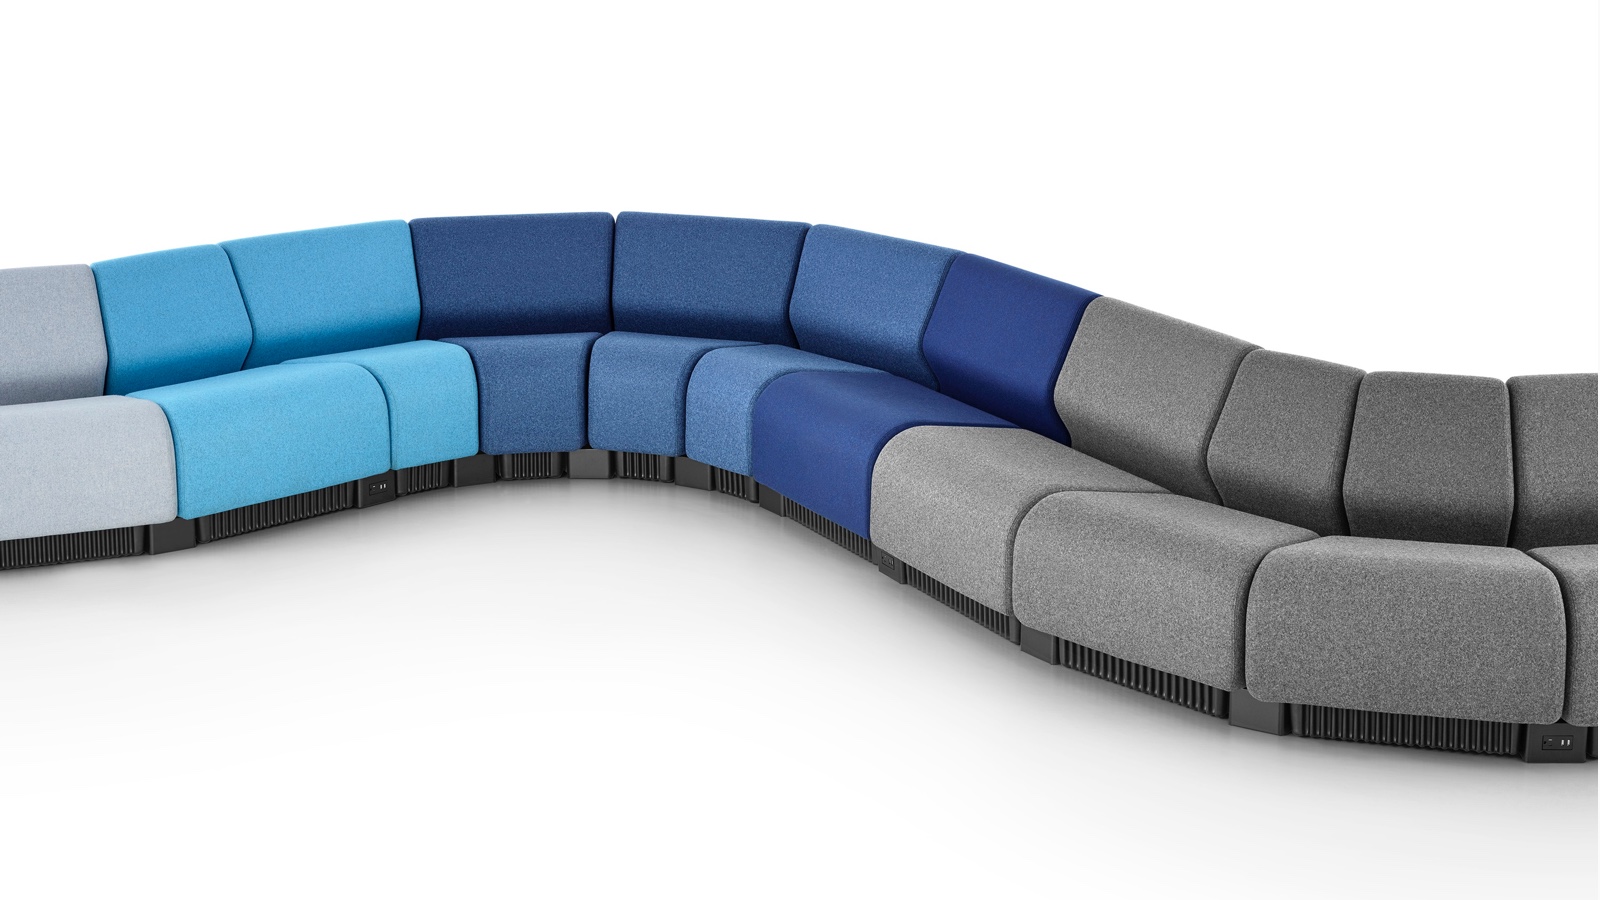 A serpentine seating configuration formed with Chadwick Modular Seating modules in shades of gray and blue.